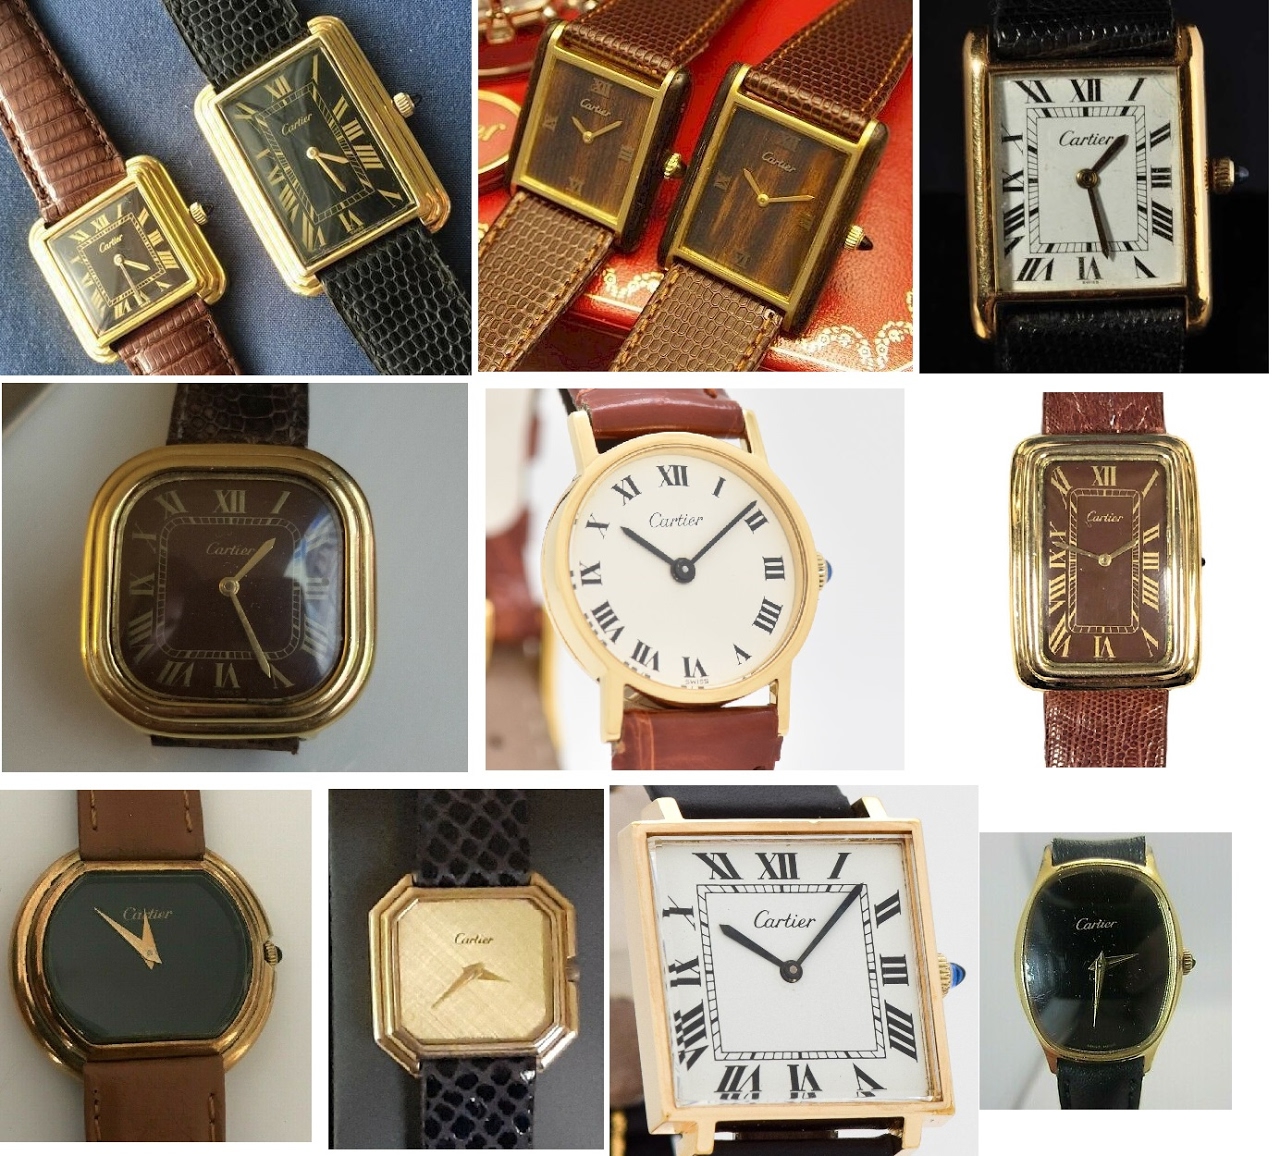 hold - The mystery the Cartier Pre-Must models